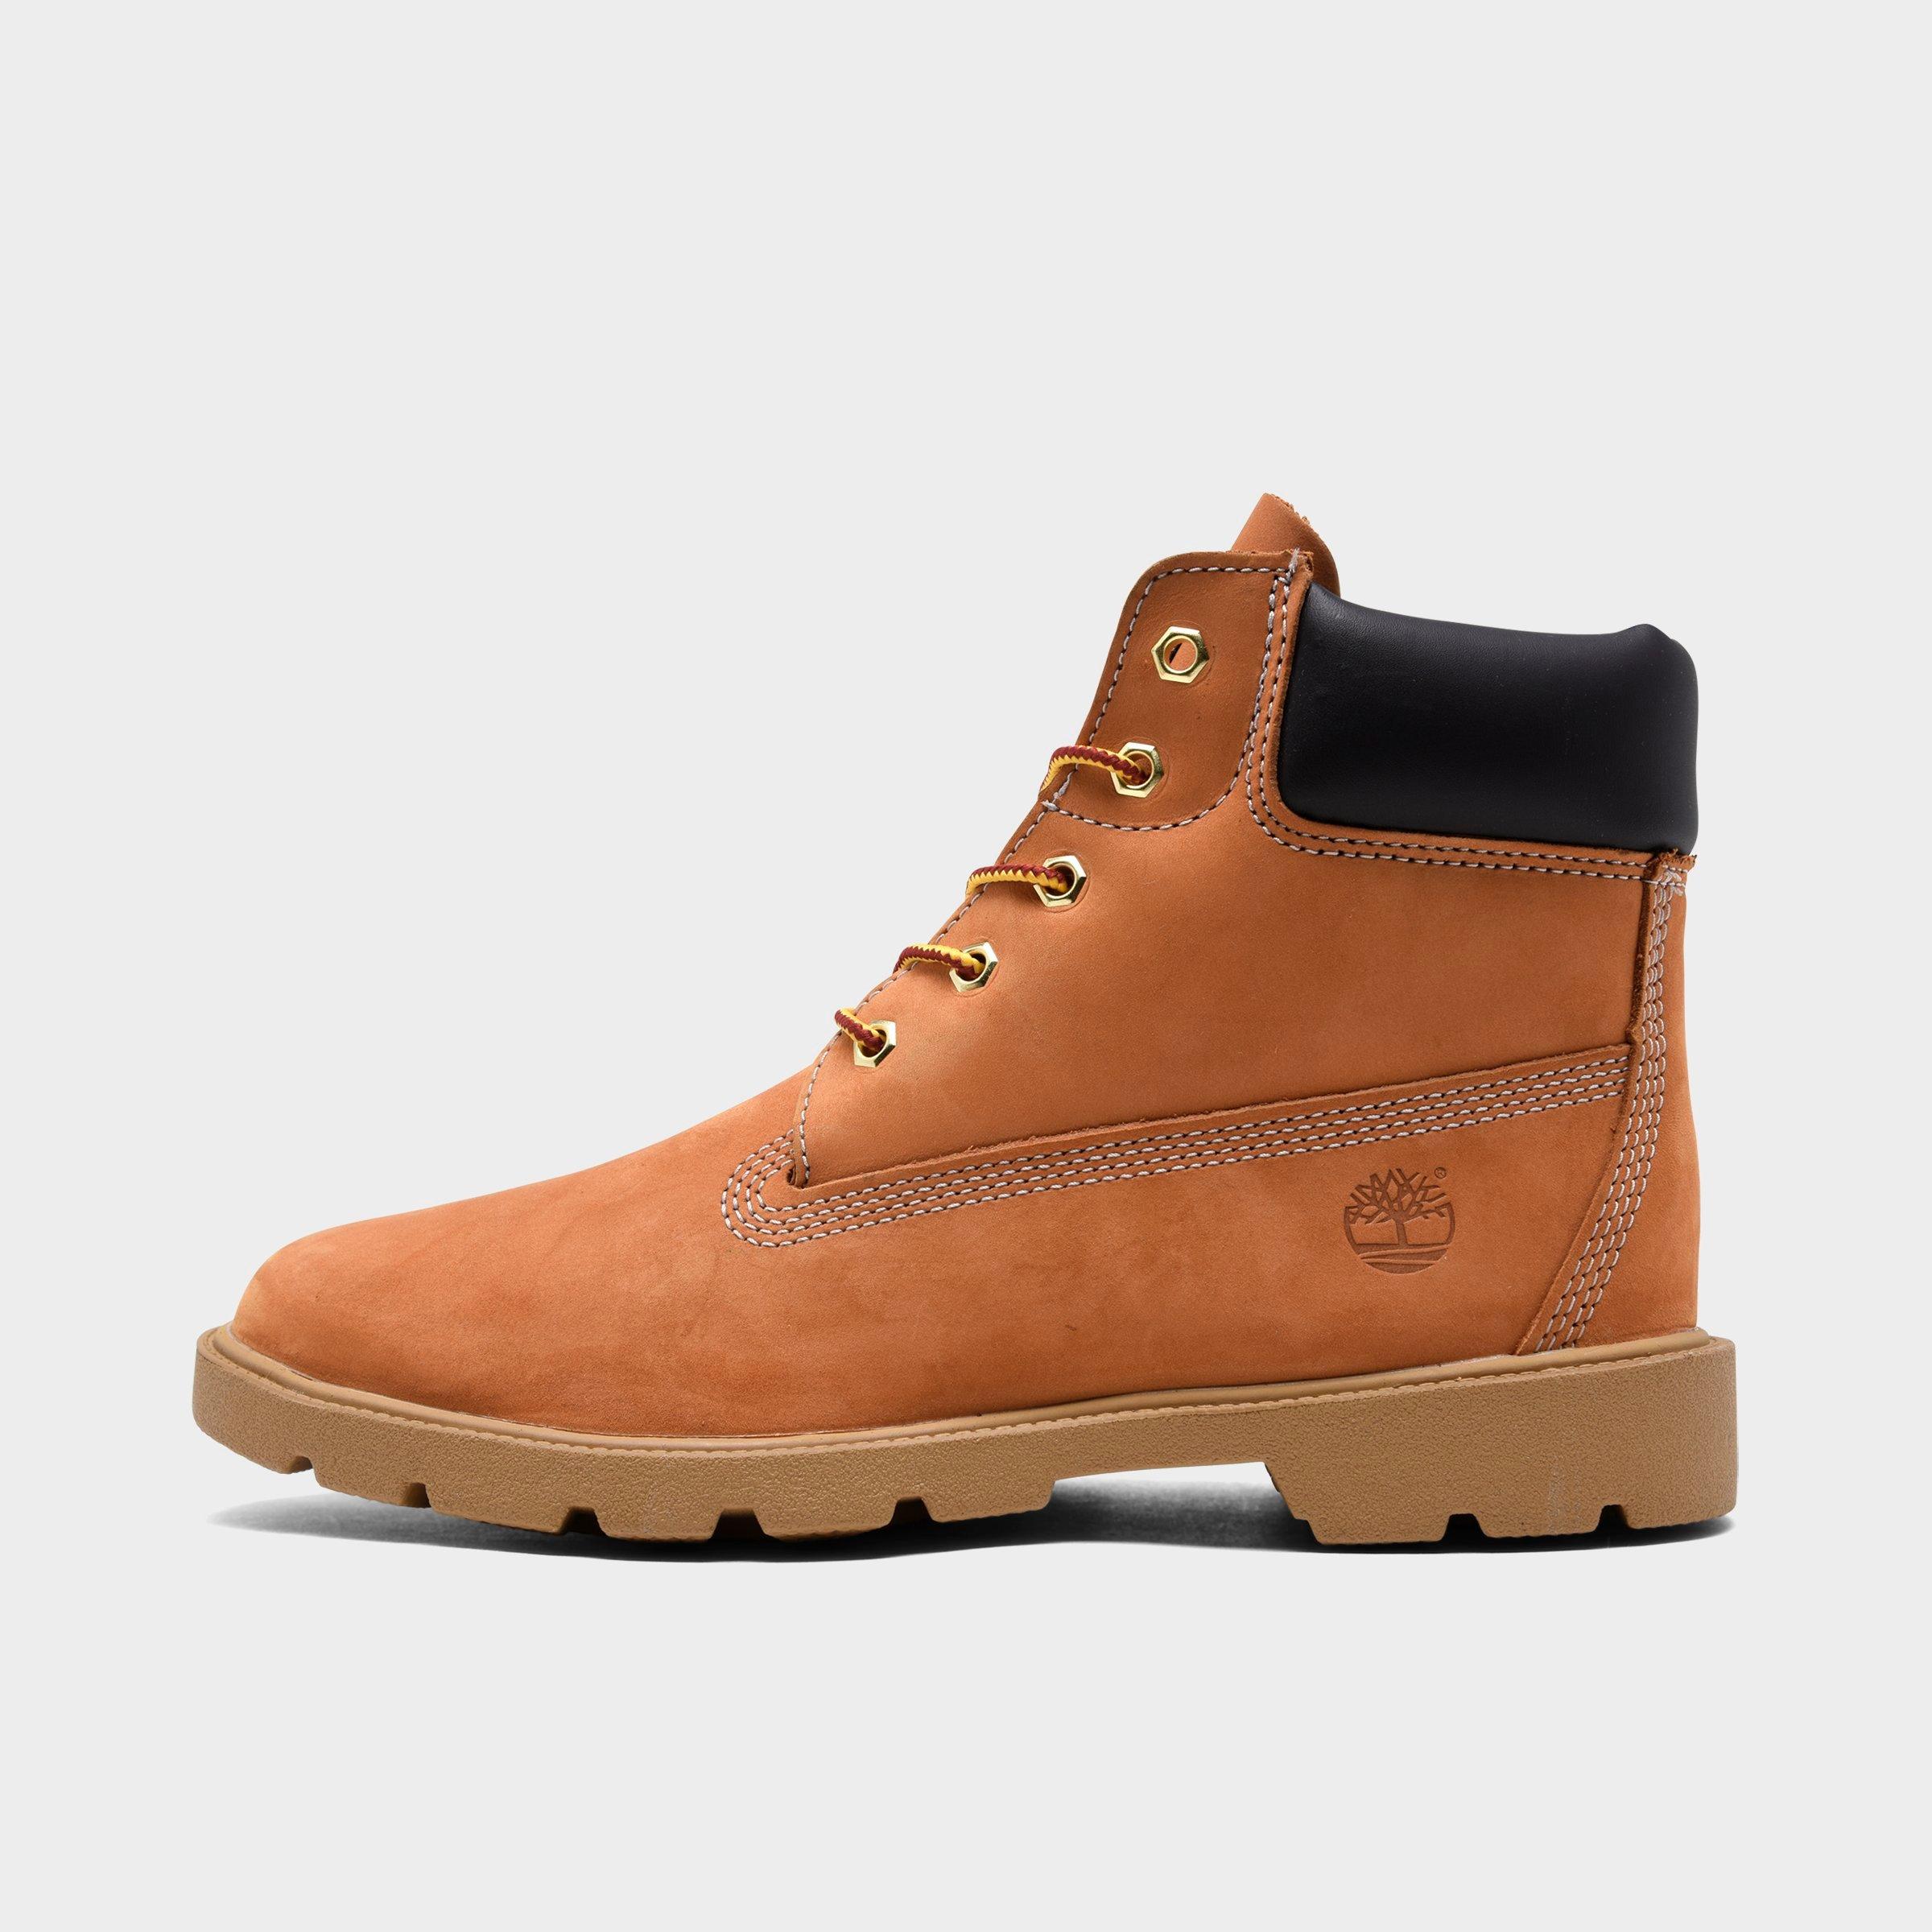 timberland 6 inch boots sizing